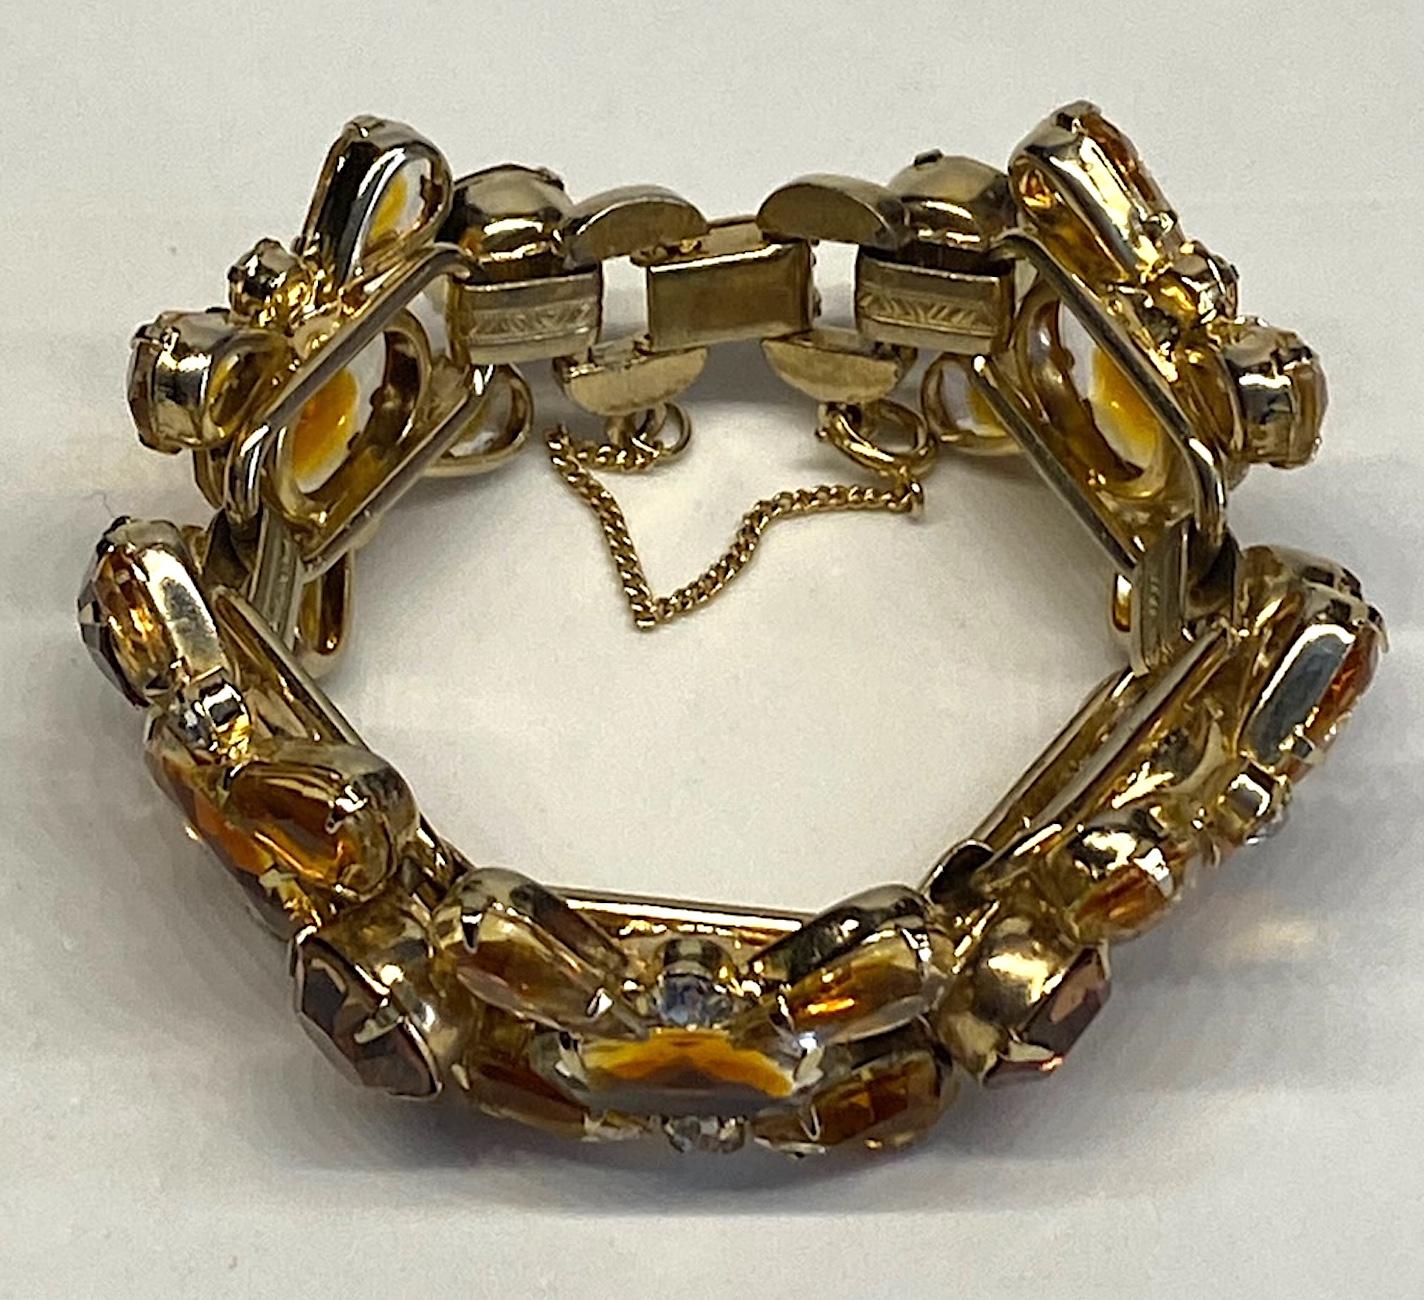 A very nice Juliana crystal and rhinestone bracelet from the 1960s. It is shown on page 204 in The Art of Juliana Jeweler y book by Katerina Musetti. See last photo. The large oval 13 x 18 mm stones and the 8 x 14 mm pear shape stones are clear with